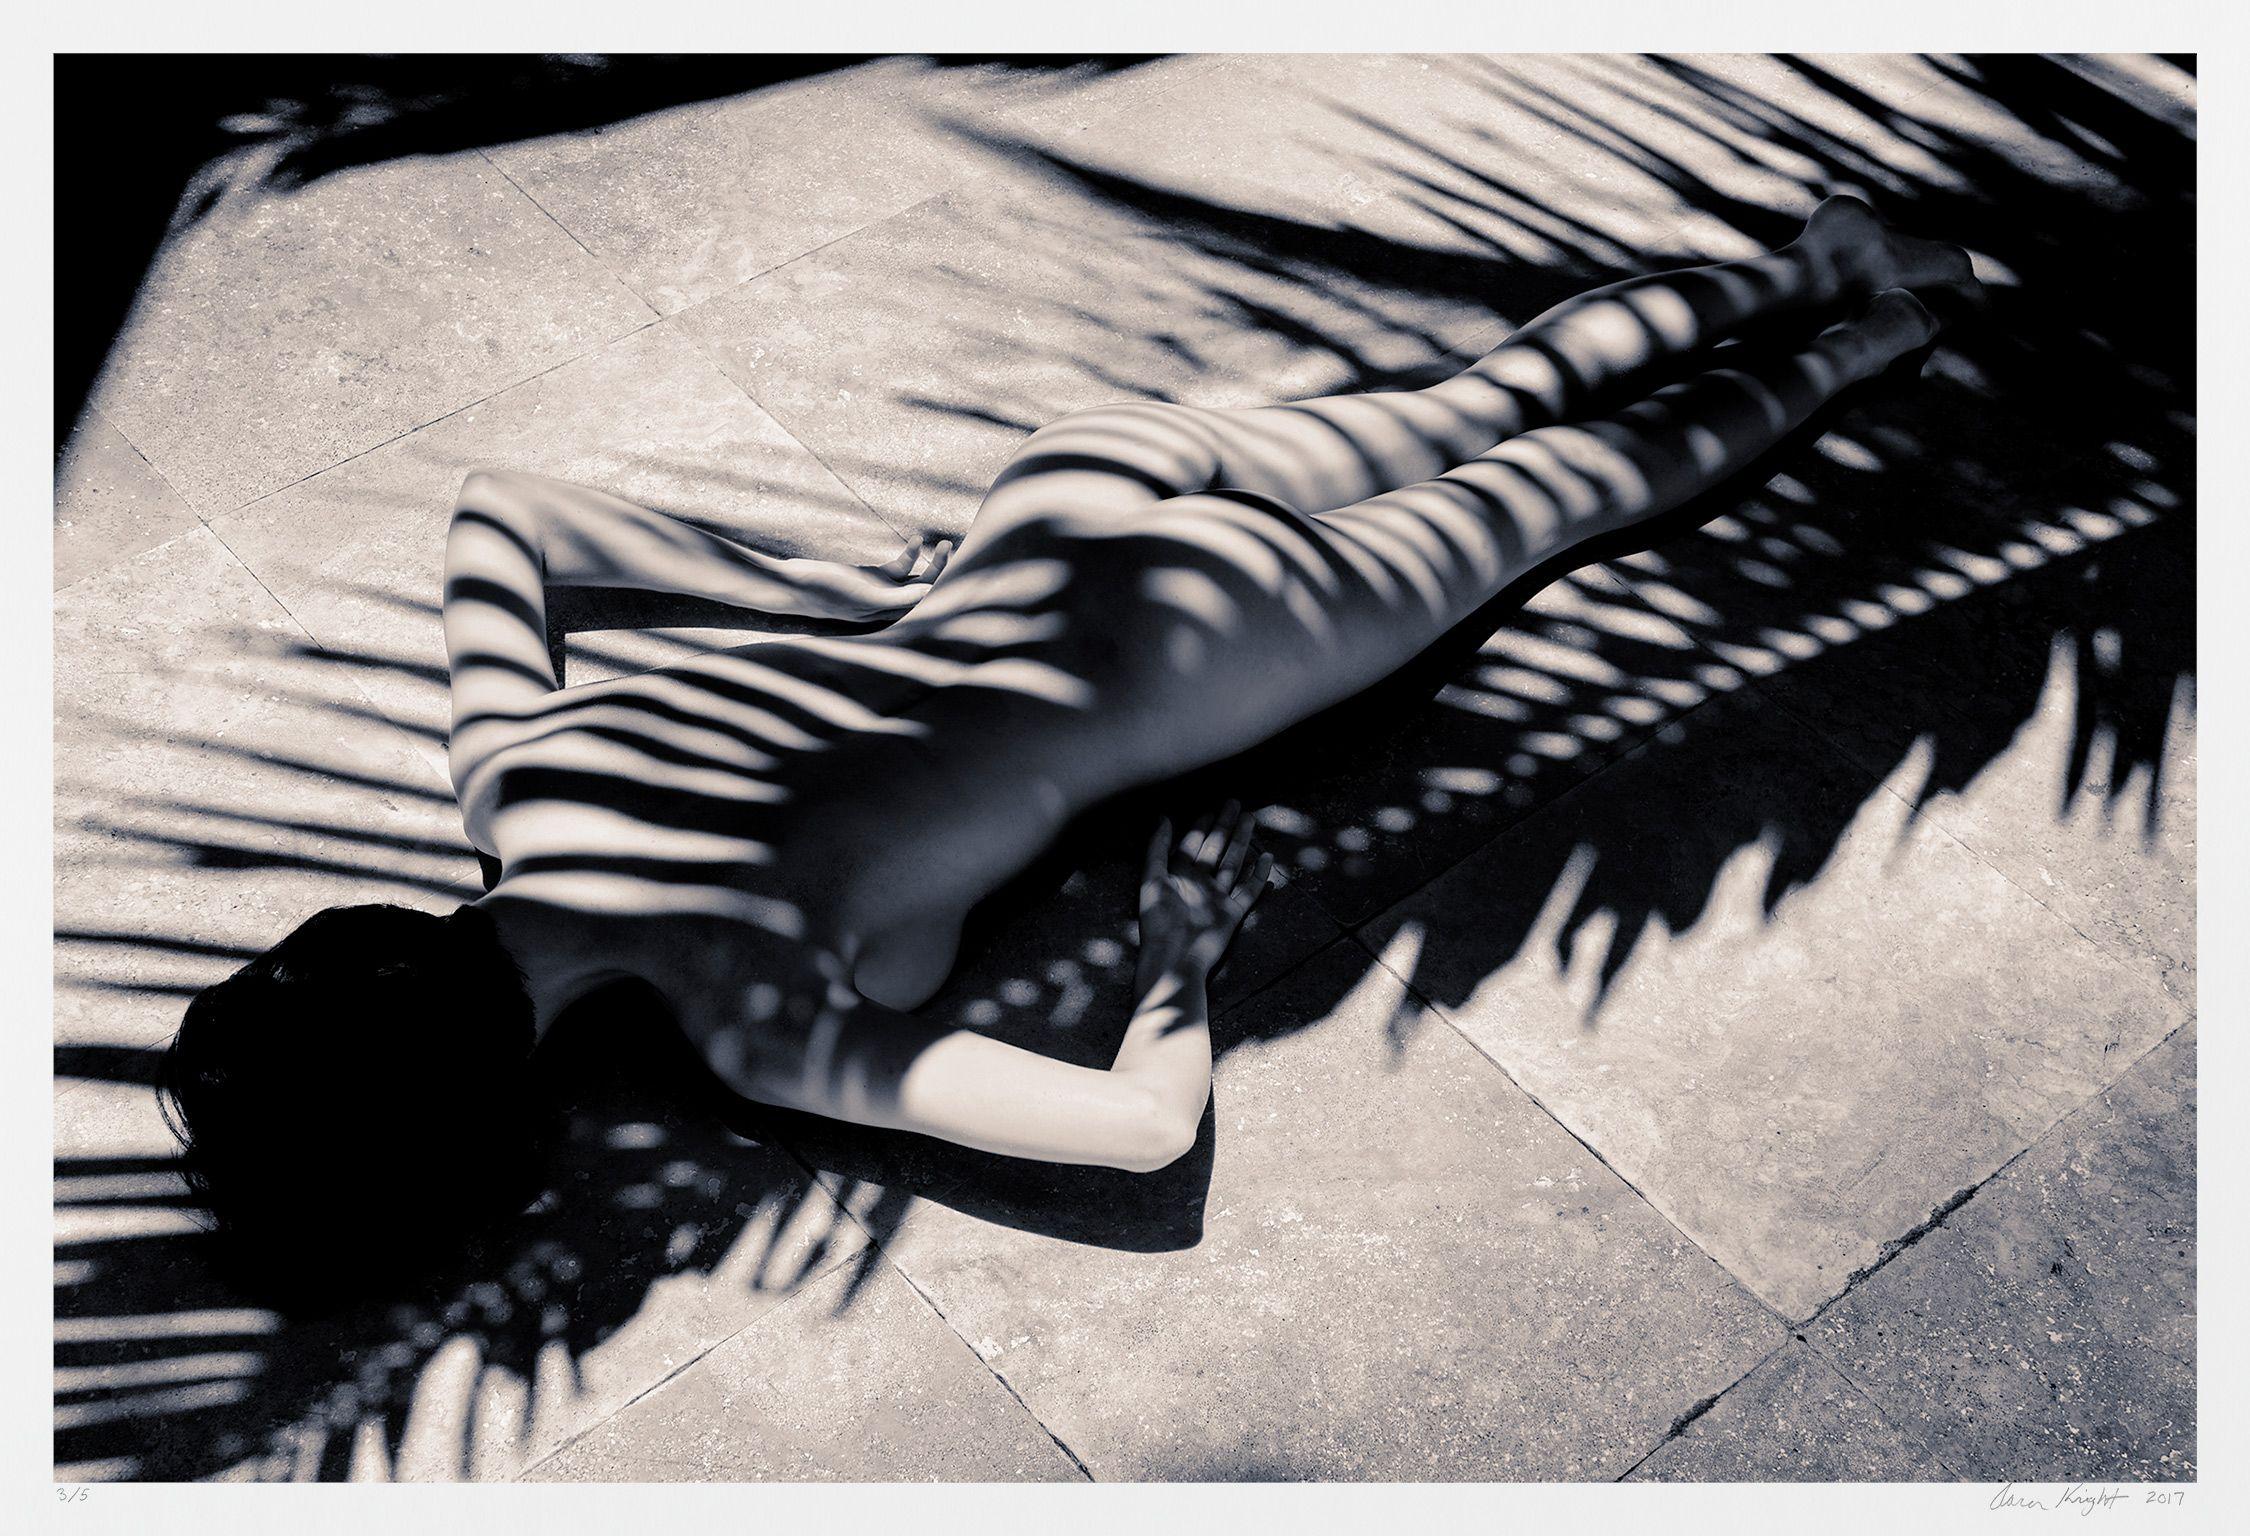 Aaron Knight Black and White Photograph - Palm Zebra, Photograph, Archival Ink Jet